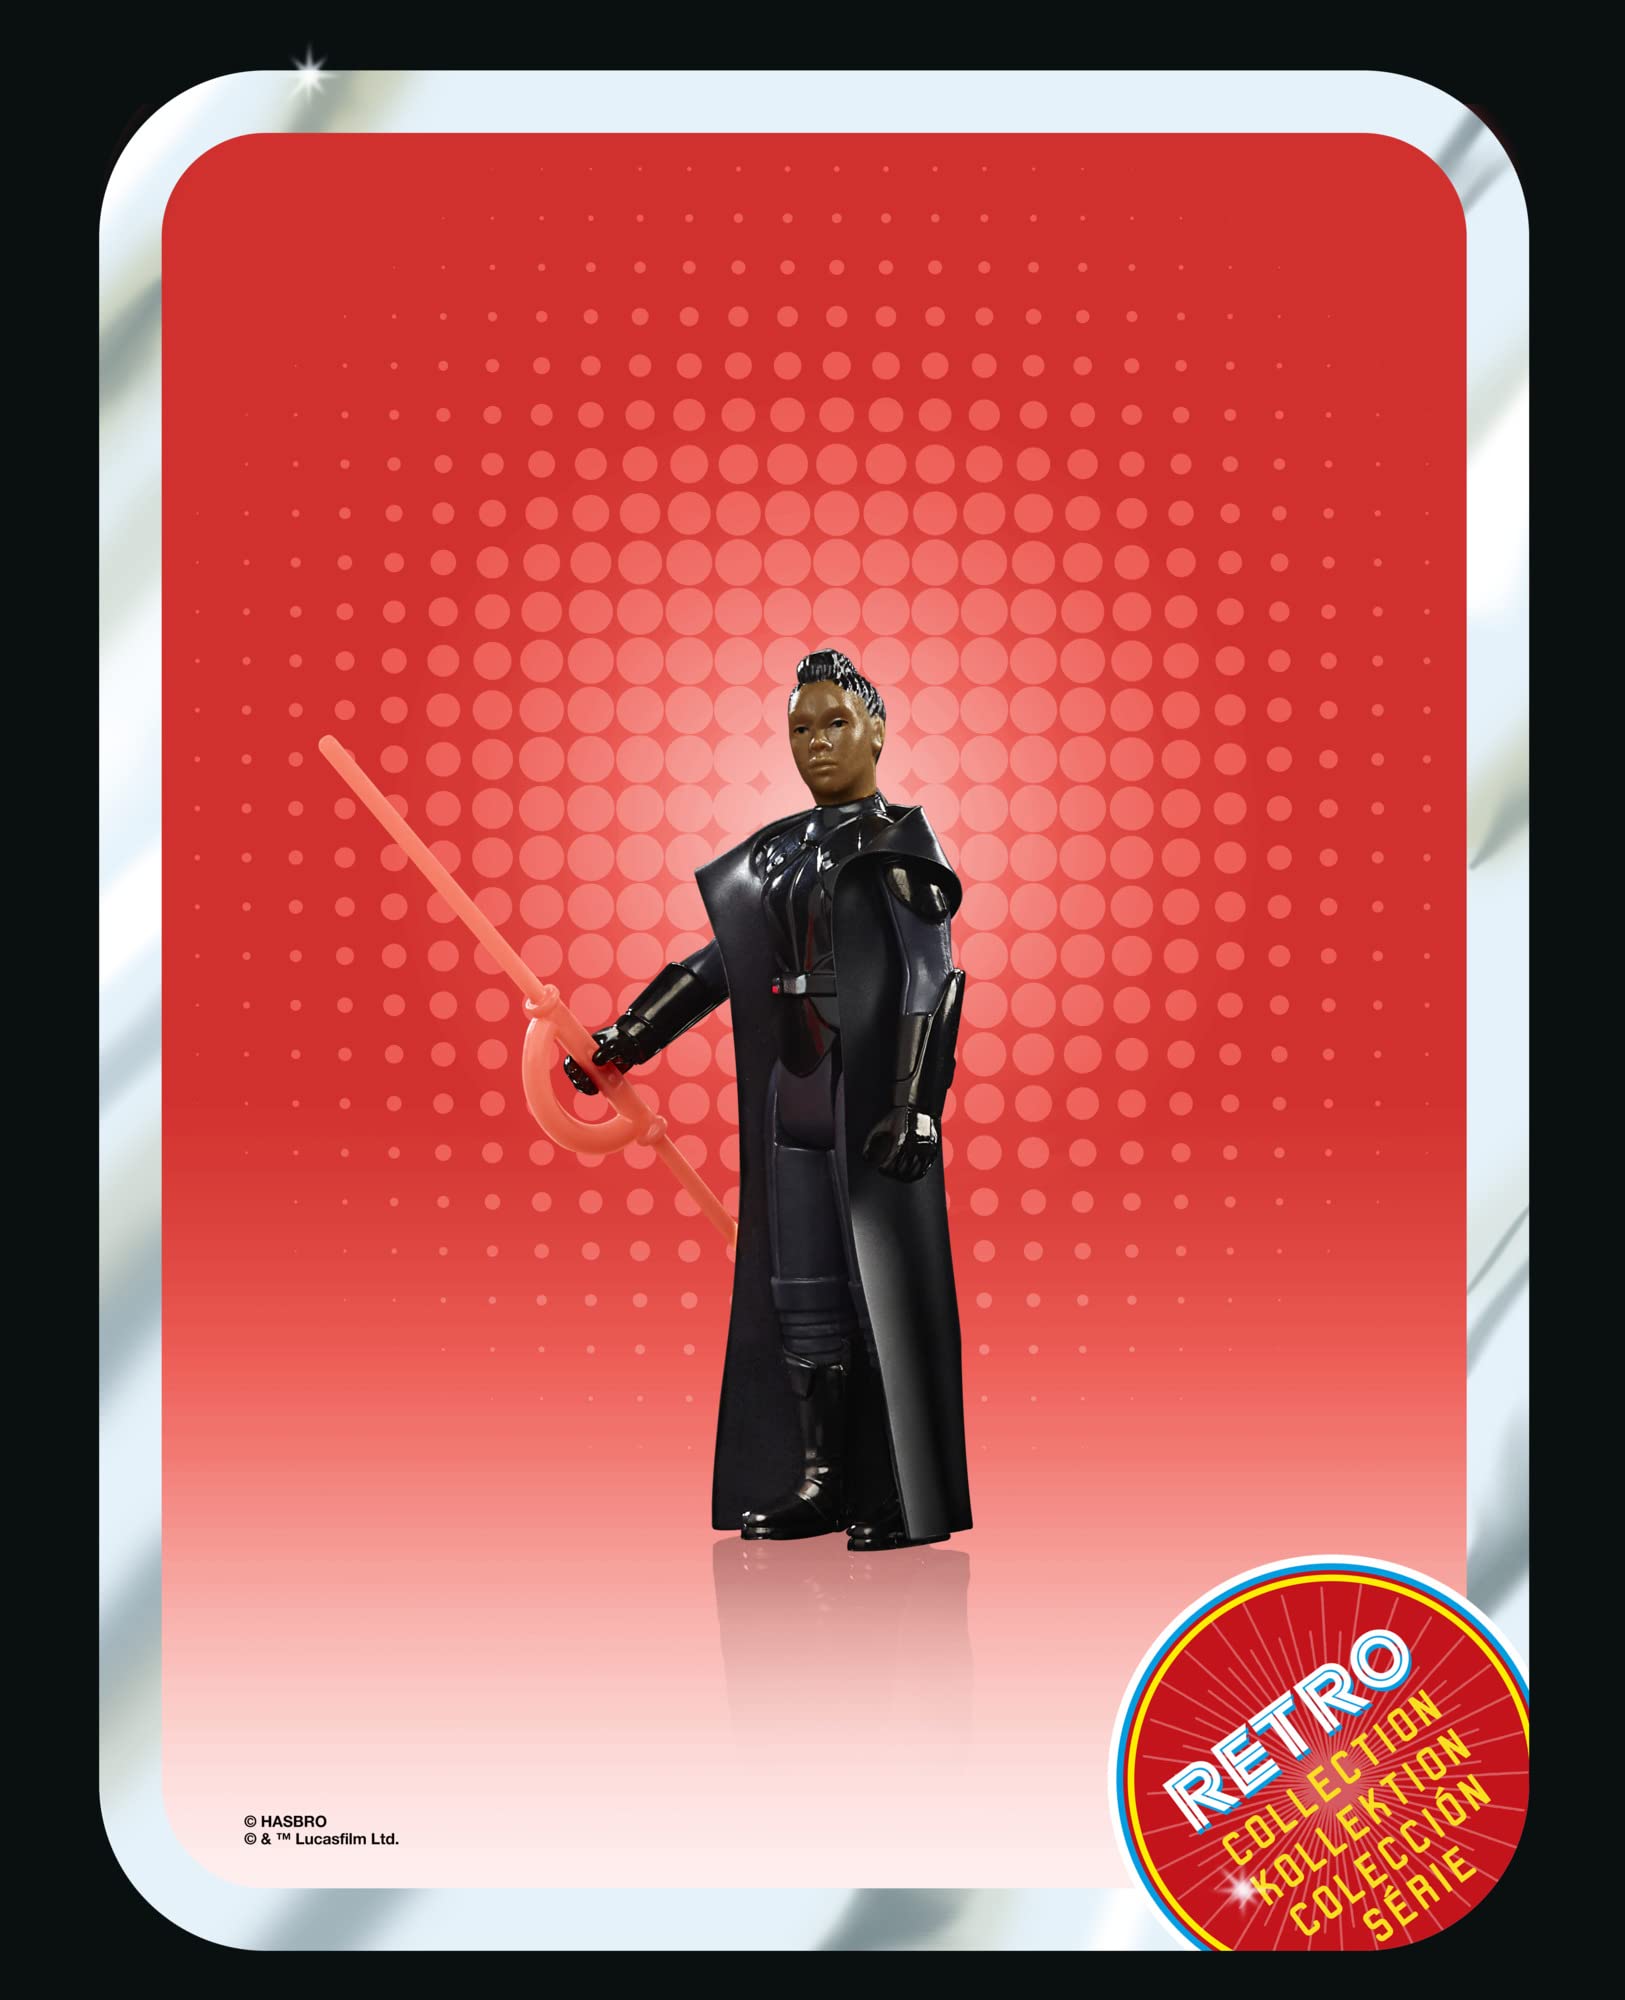 STAR WARS Retro Collection Reva (Third Sister) Toy 3.75-Inch-Scale OBI-Wan Kenobi Action Figure, Toys for Kids Ages 4 and Up